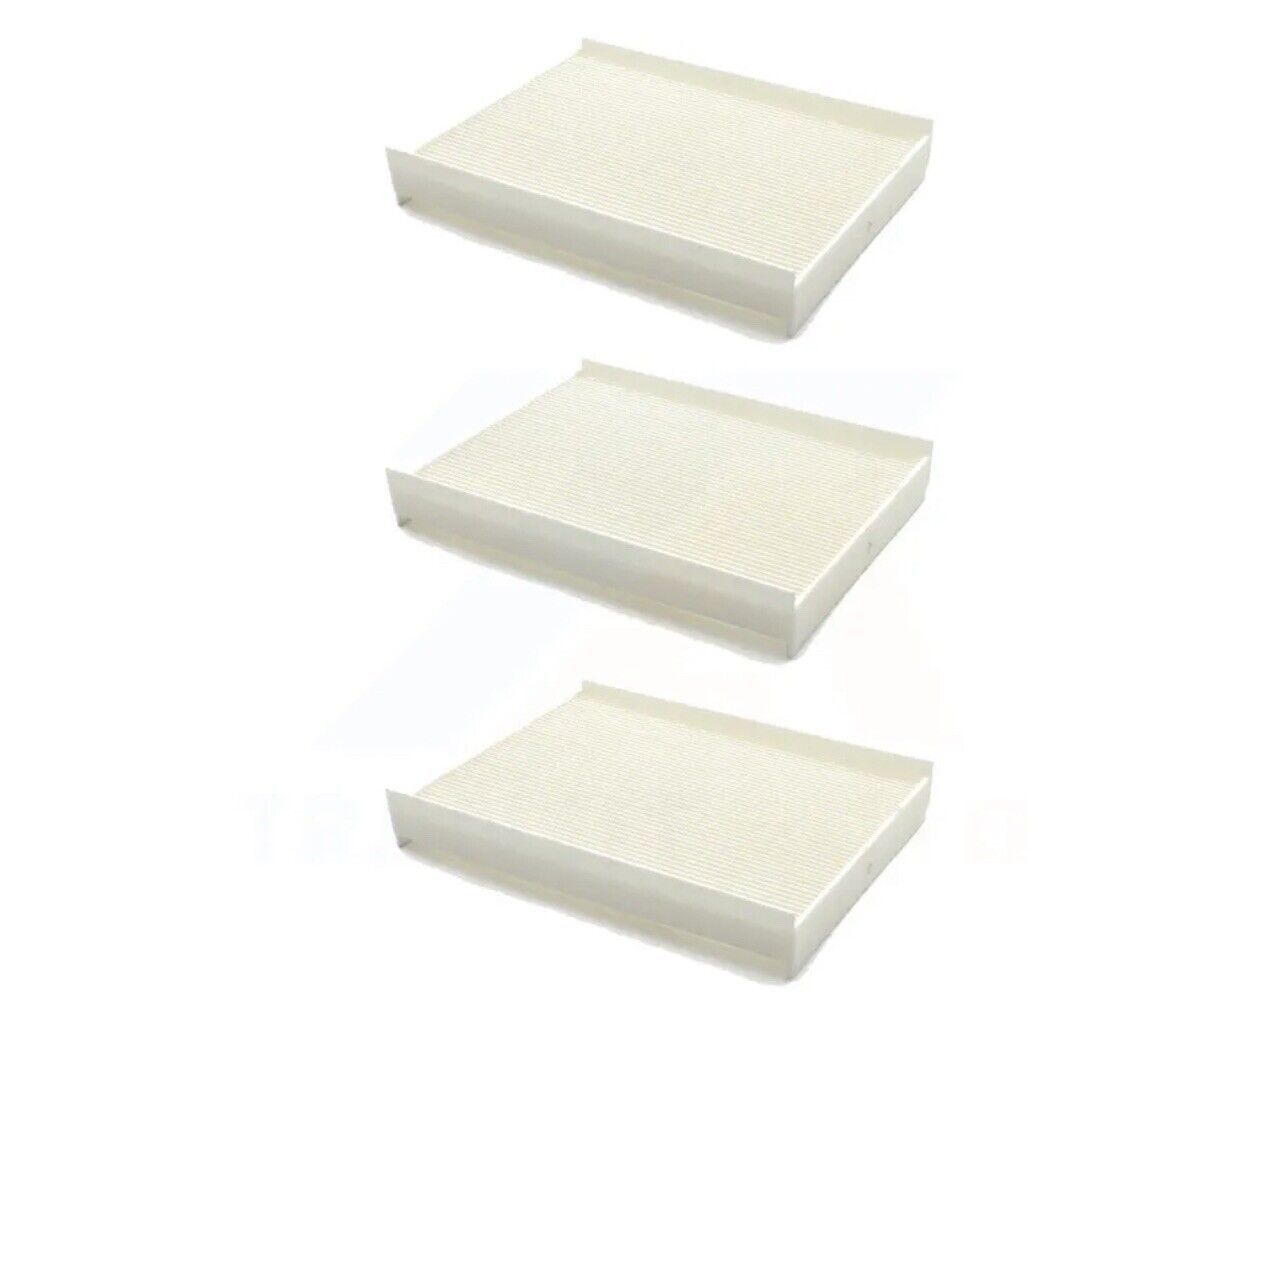 Cabin Air Filter (3 Pack) For Ford F-150 F-250 Super Duty F-350 Expedition F-450